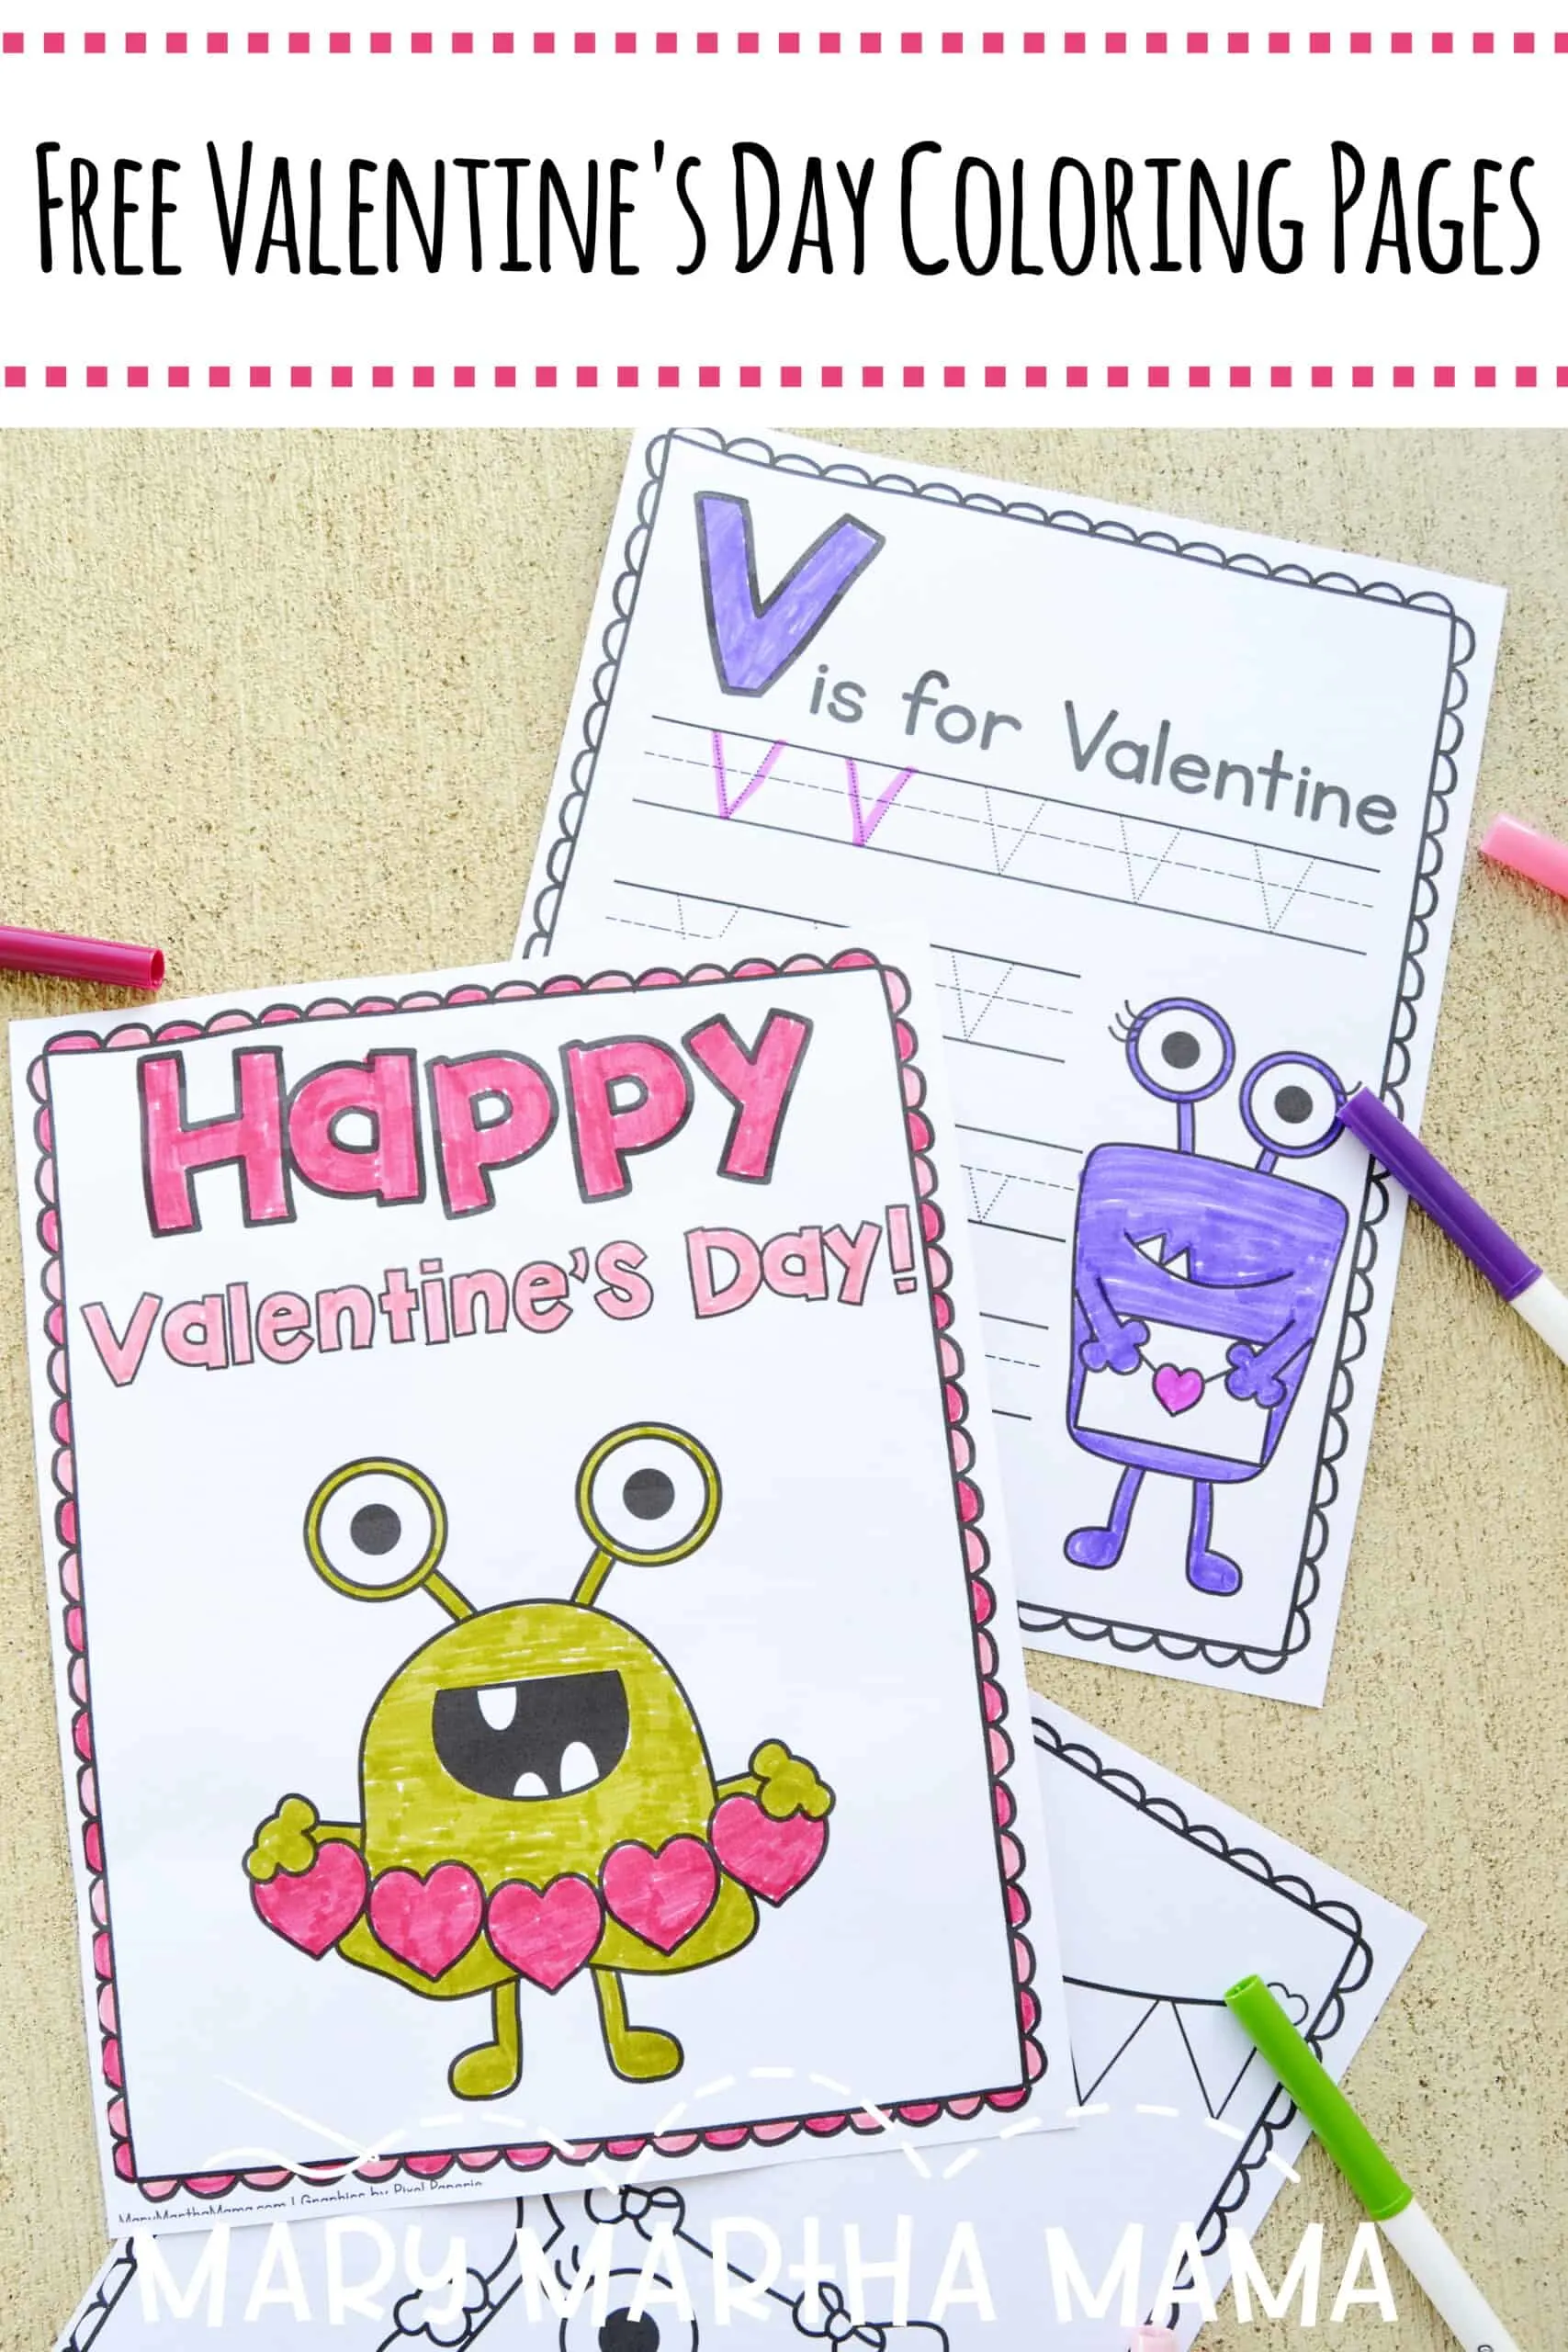 Valentines day coloring pages â mary martha mama